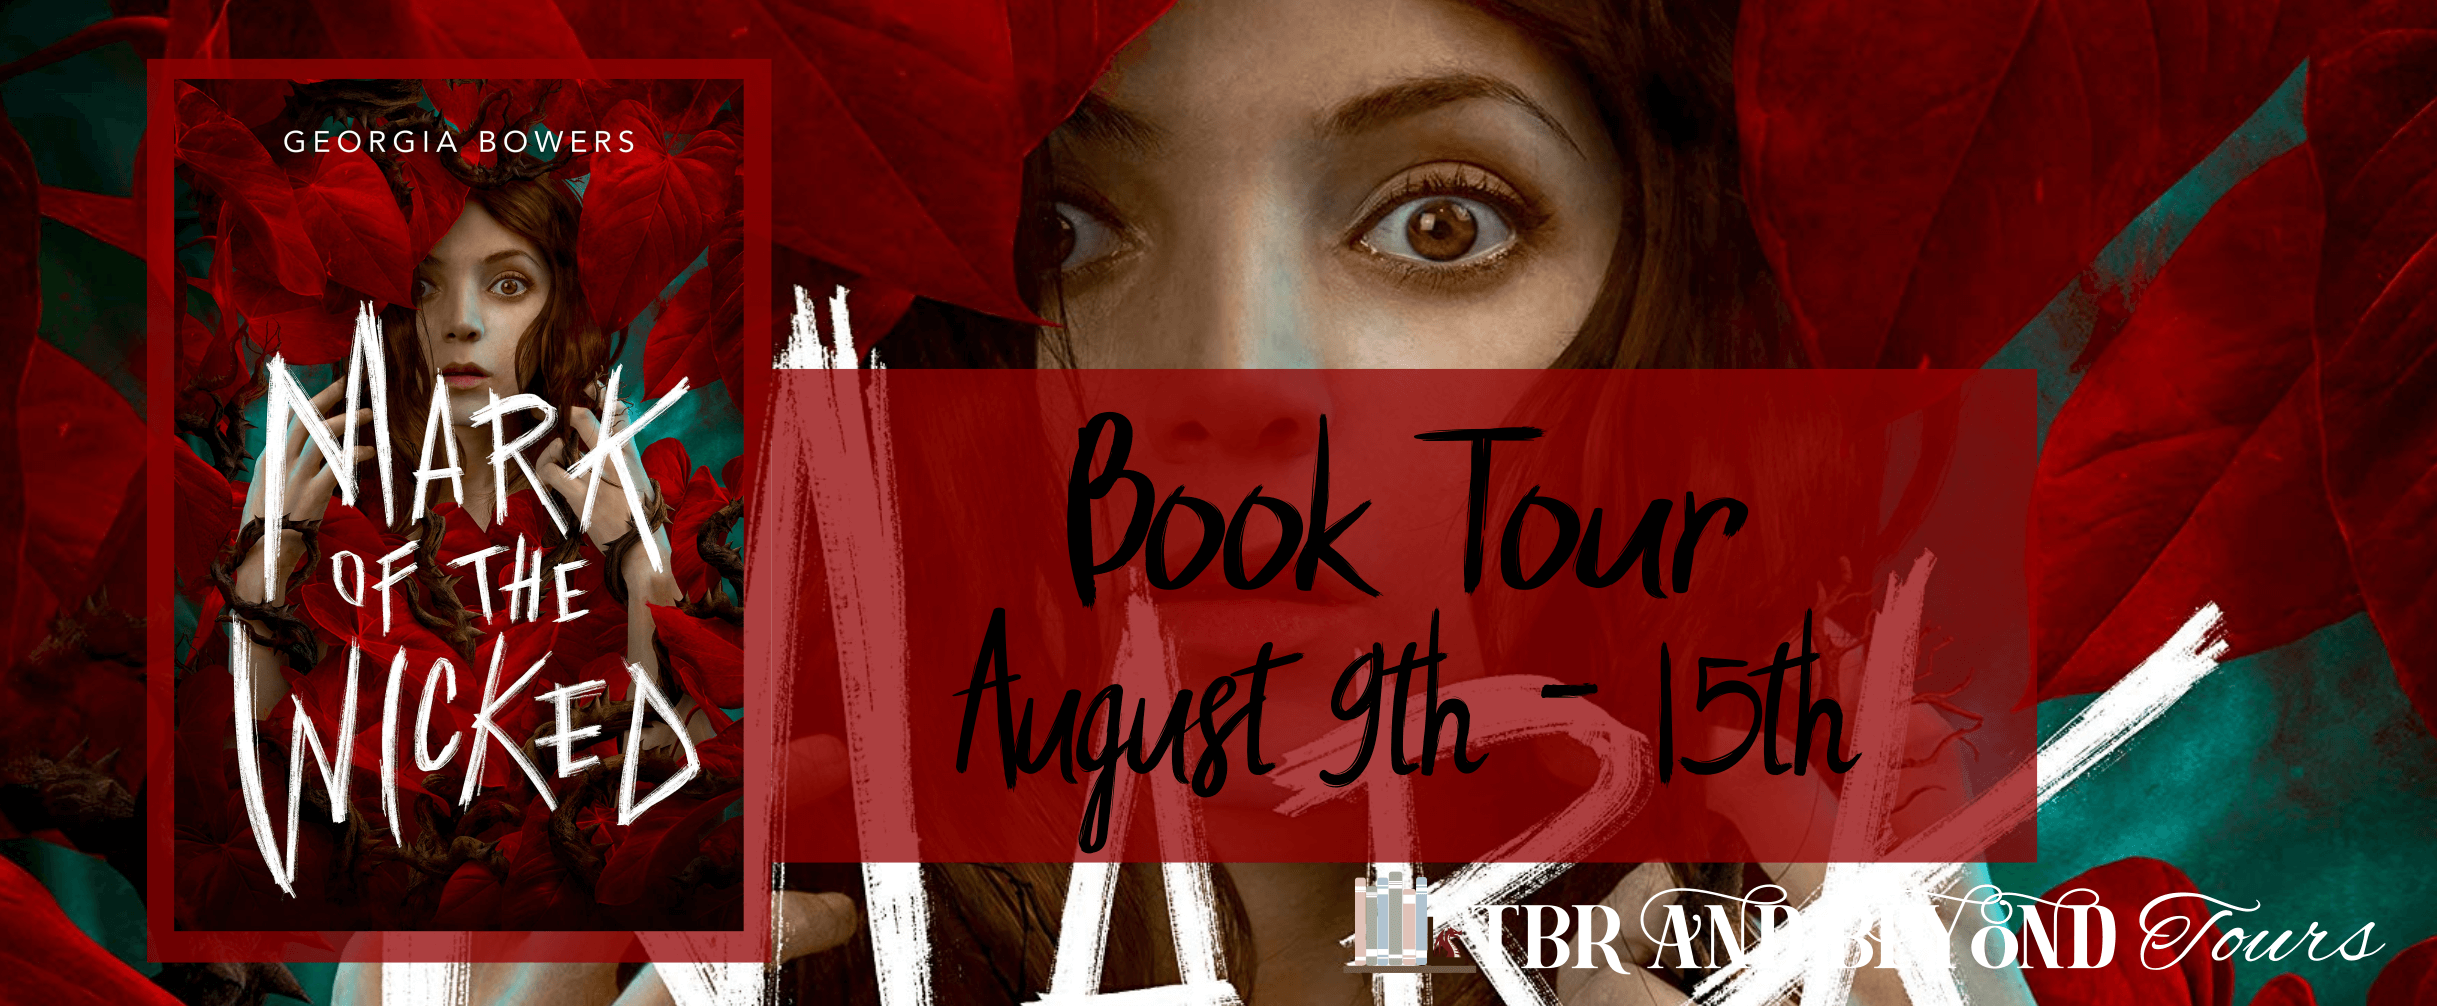 Mark of the Wicked by Georgia Bowers ● TBR & Beyond Blog Tour: Review & Favorite Quotes